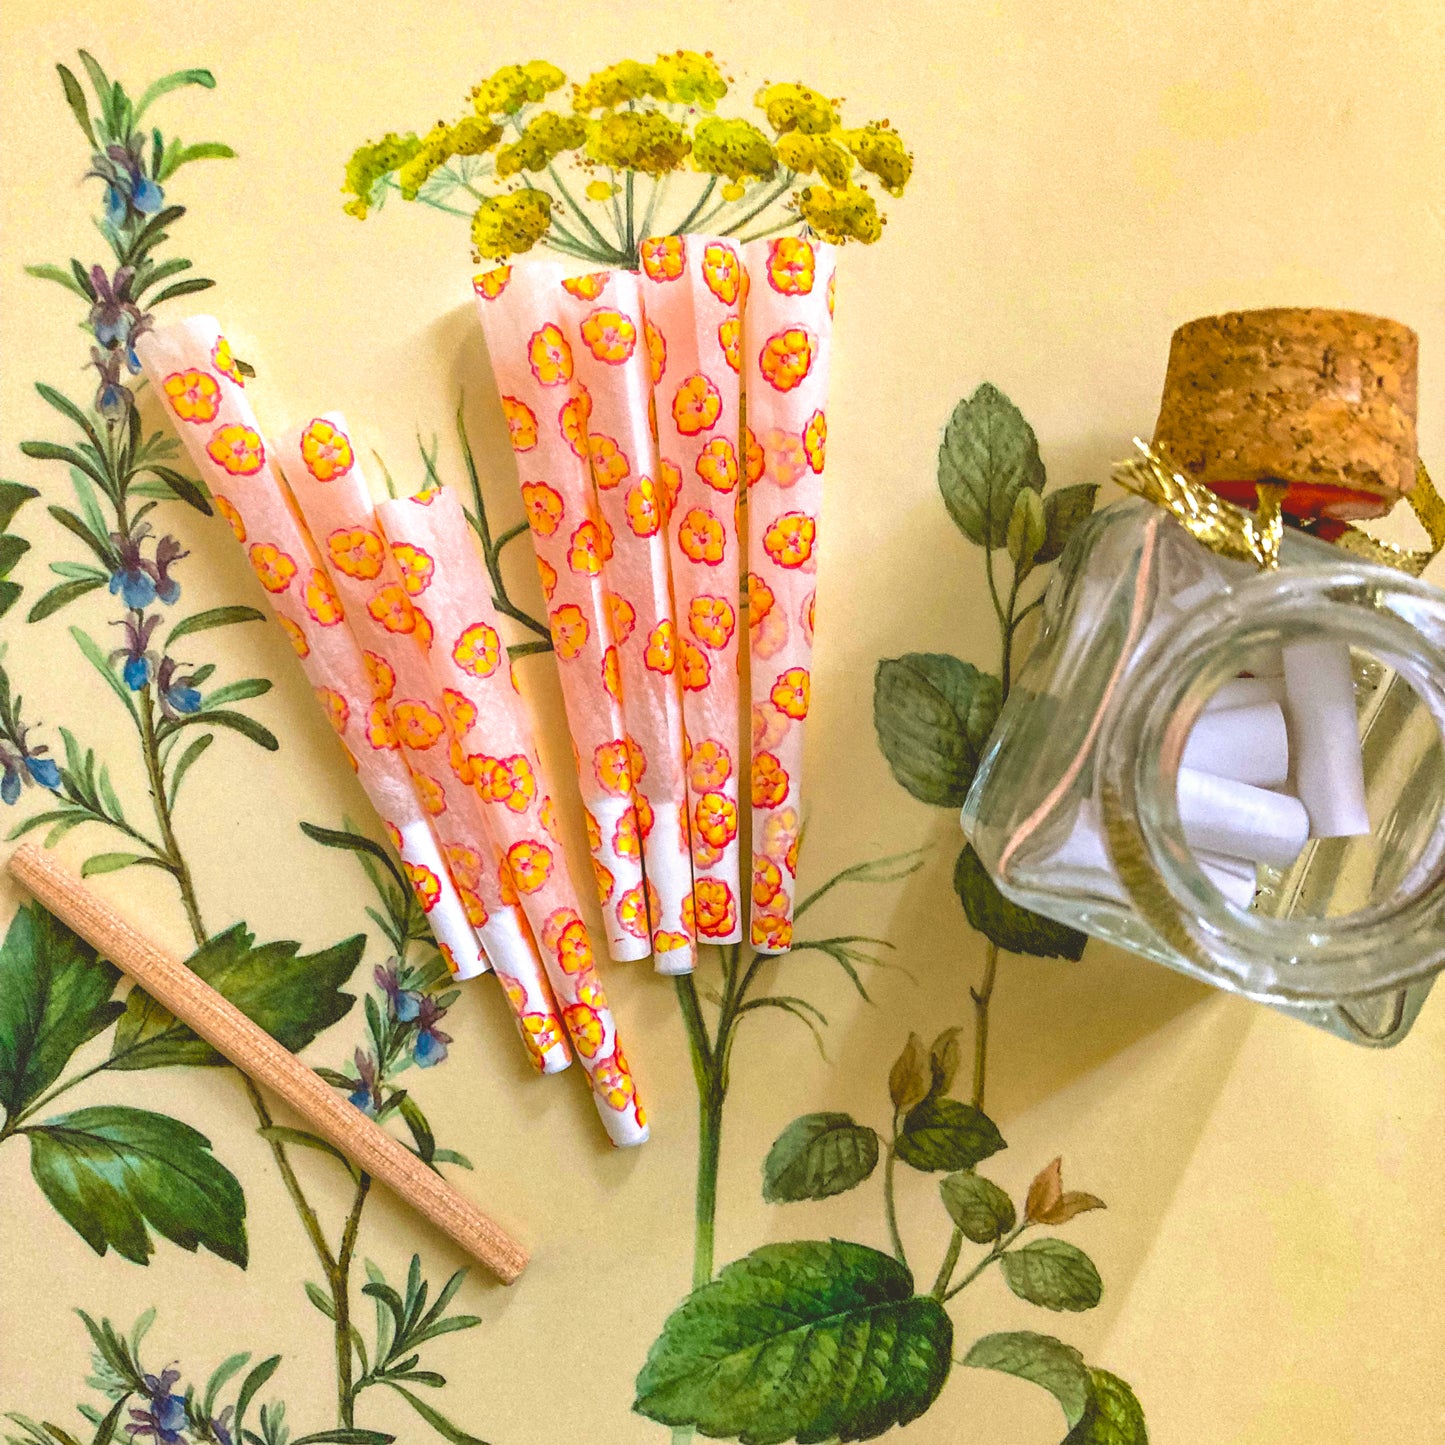 The Poppy Cones, set of 8 pre-rolled cones: yellow poppy printed cones. These designer pre-rolled cones are girly, pretty, vegan, cute, cool, standard size, high quality, even burn, natural dyes, best tasting, slow burn.